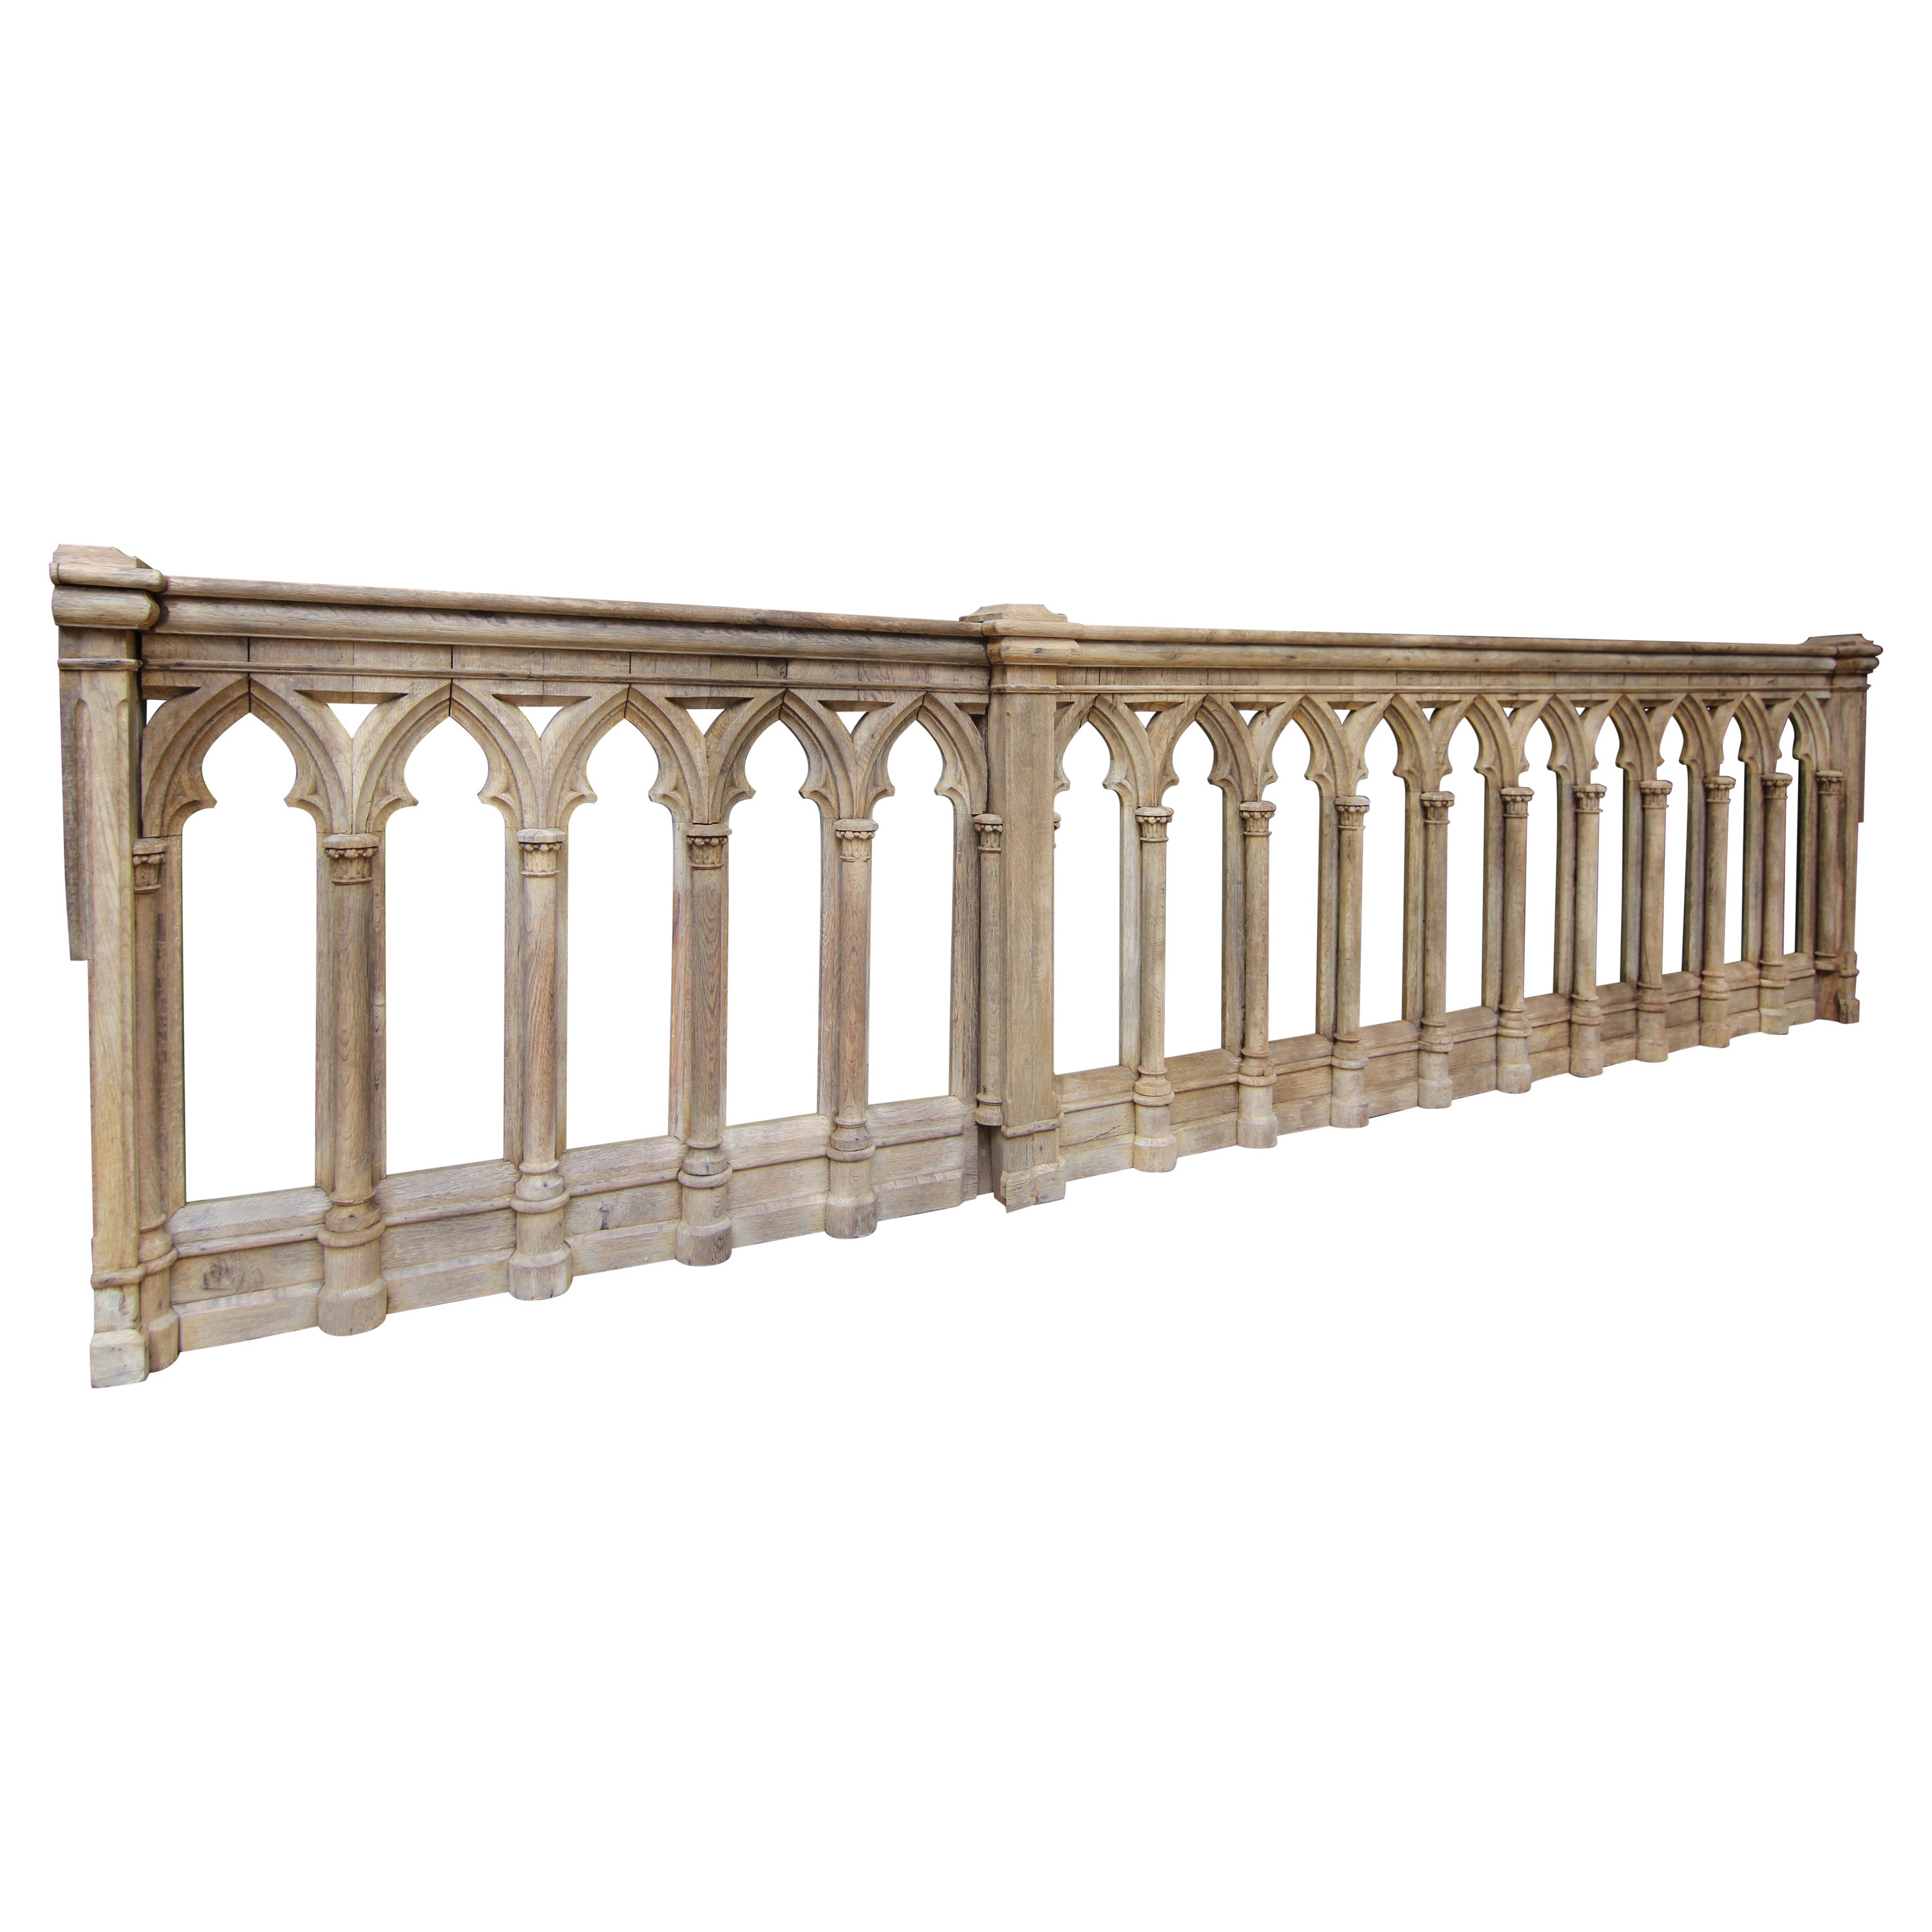 Late 19th Century Gothic Revival Oak Balustrade with Entry